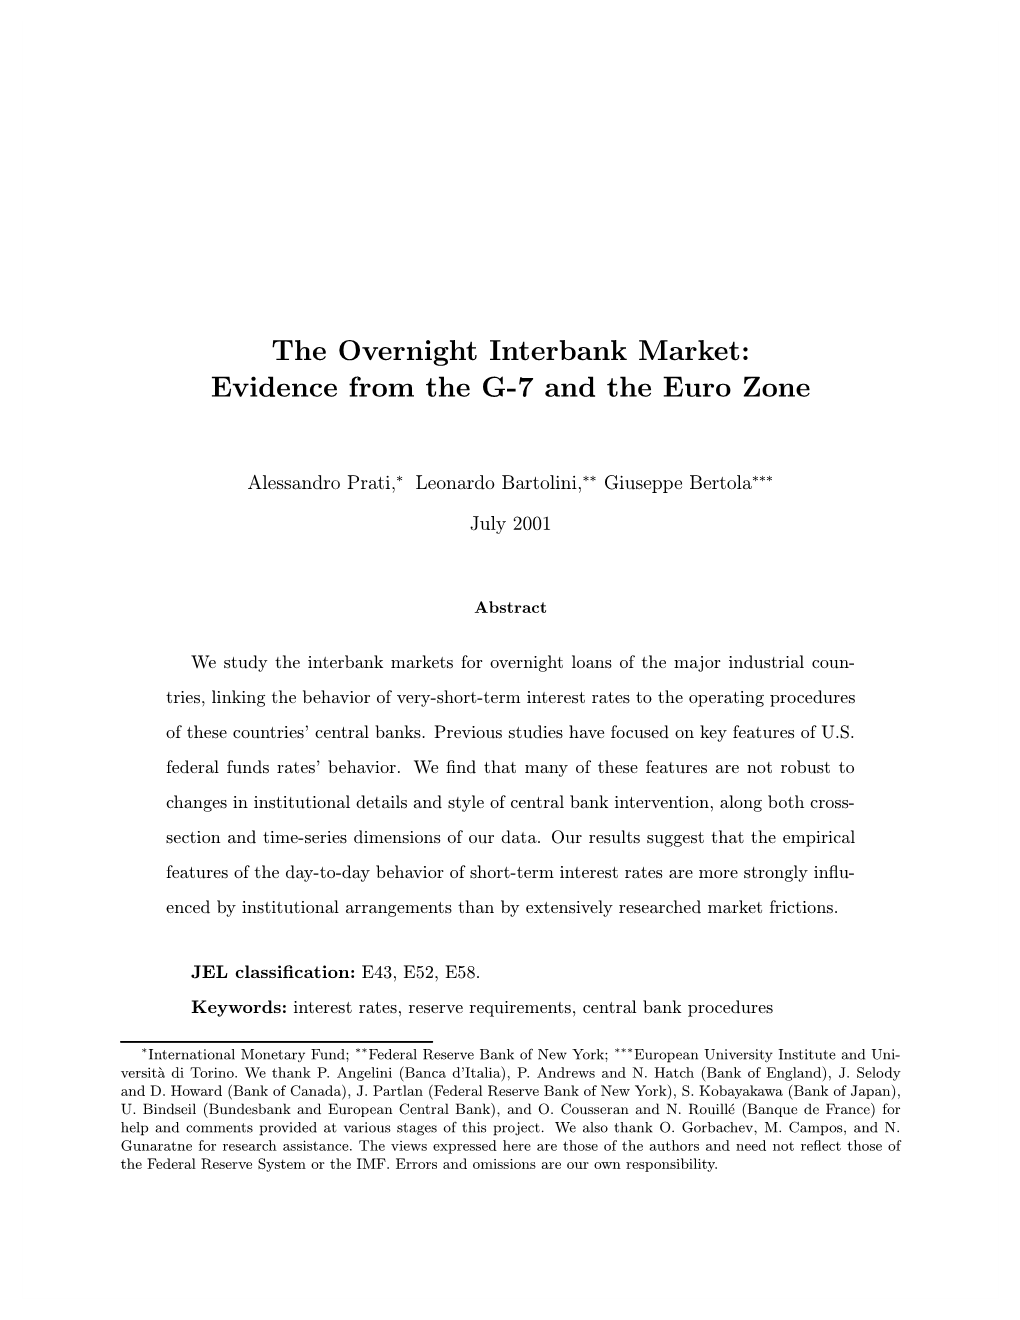 The Overnight Interbank Market: Evidence from the G-7 and the Euro Zone